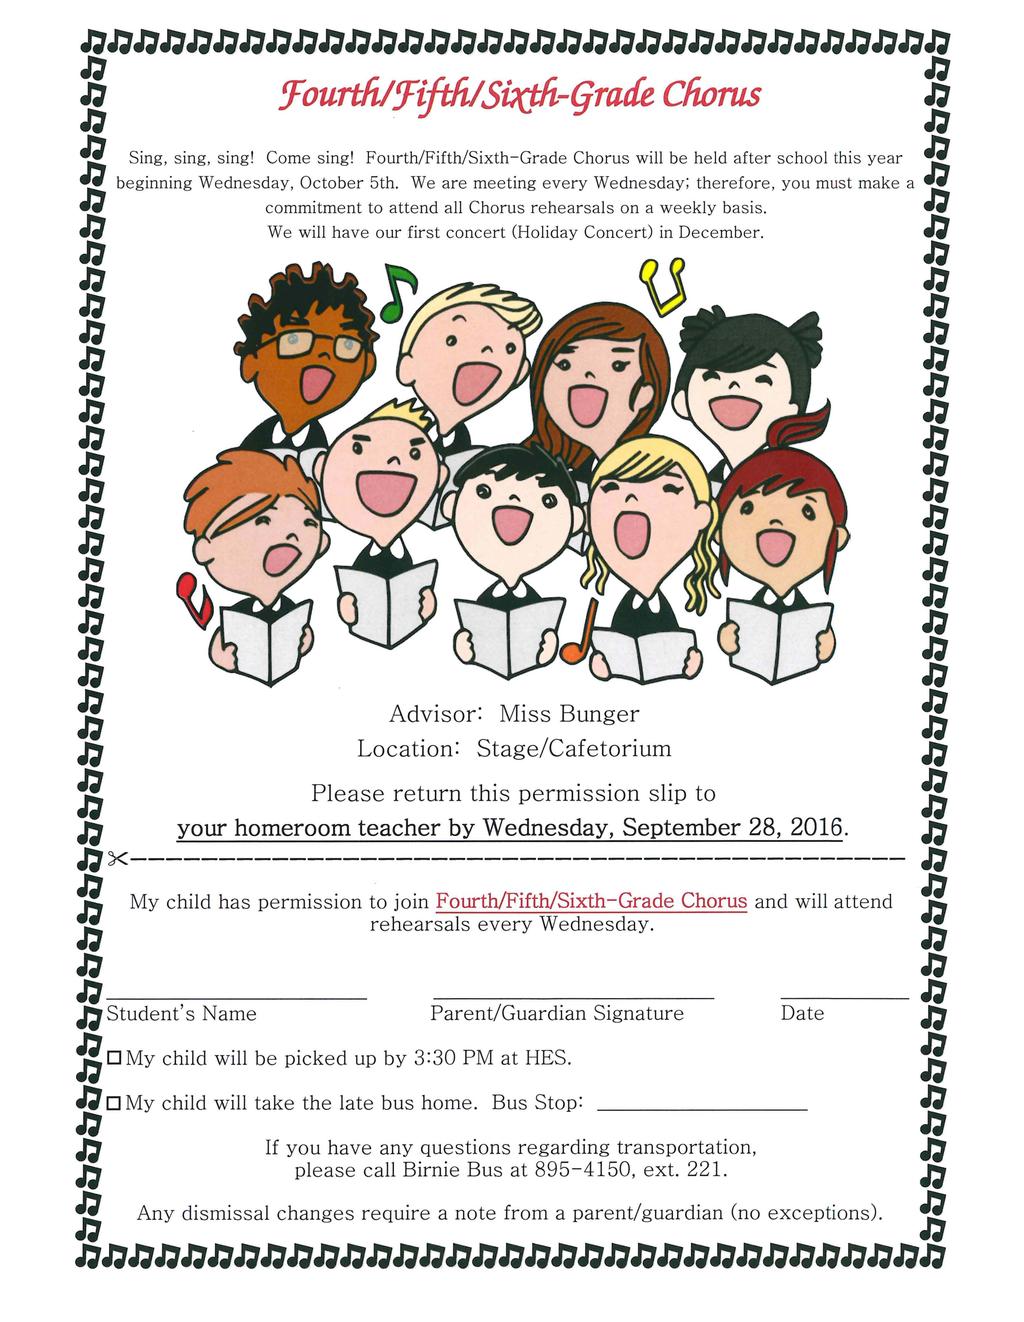 js!{ourt/i/!fi.r+r.;s~-(jrade. Chorus js - ~w~ -2 Sig,. sig, sig! Come sig! Fourth/Fifth/Sixth~Grade Chorus will be held after school this year -2 ~ begmmg Wedesday, October 5th.